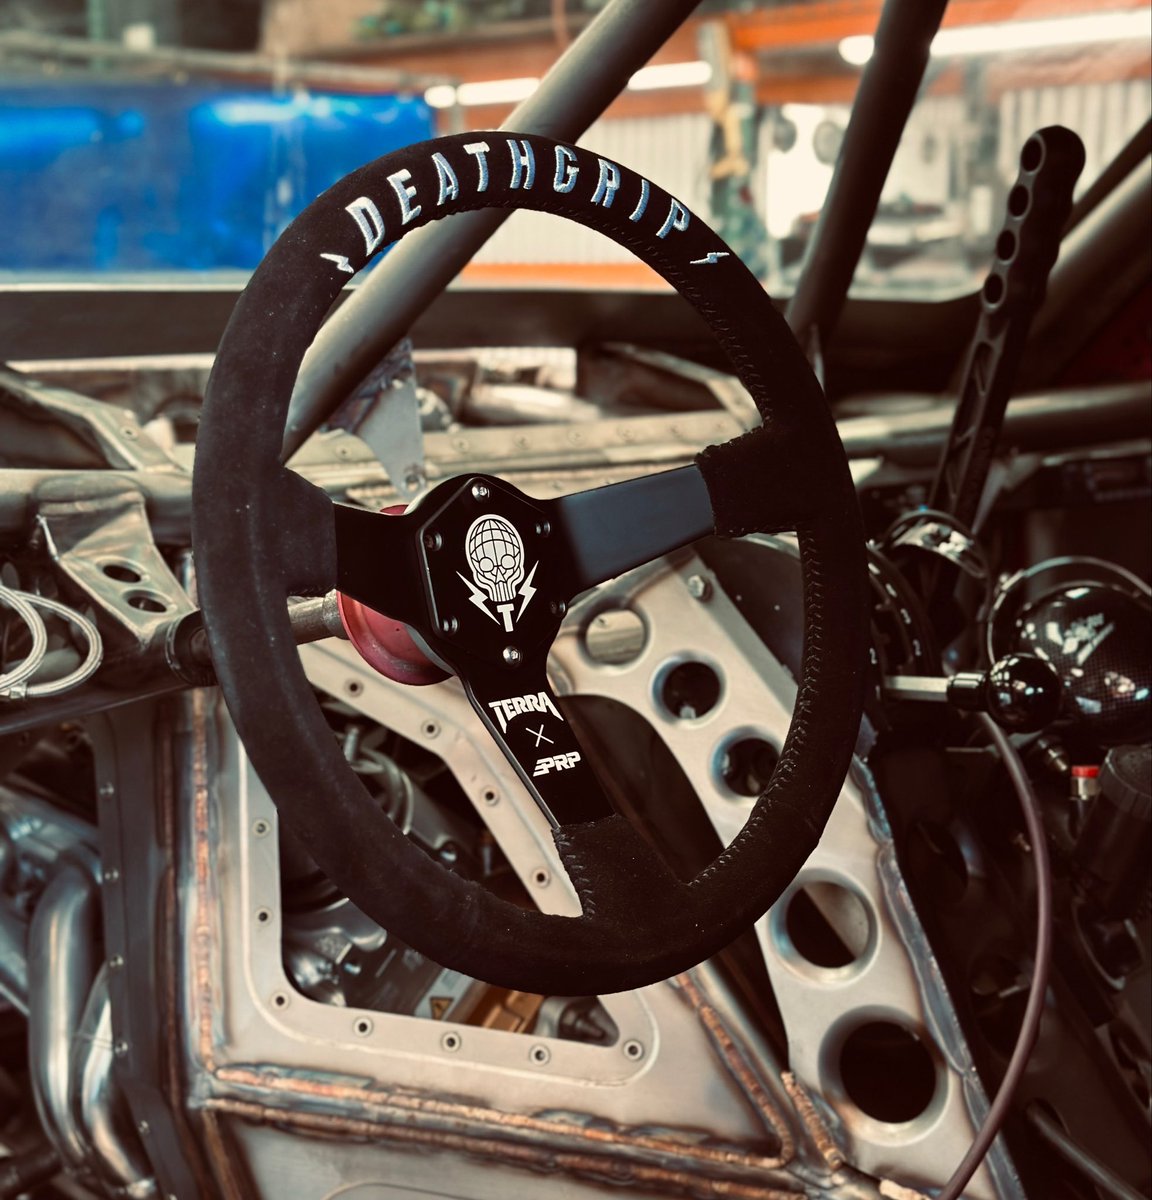 If you’re looking for a steering wheel that’s as tough as you, look no further than the Death Grip Deep Dish Wheel from Terra Crew X PRP. It’s got the strength and durability to last for years, and the black suede finish will make you look like the badass you are. Run don’t walk